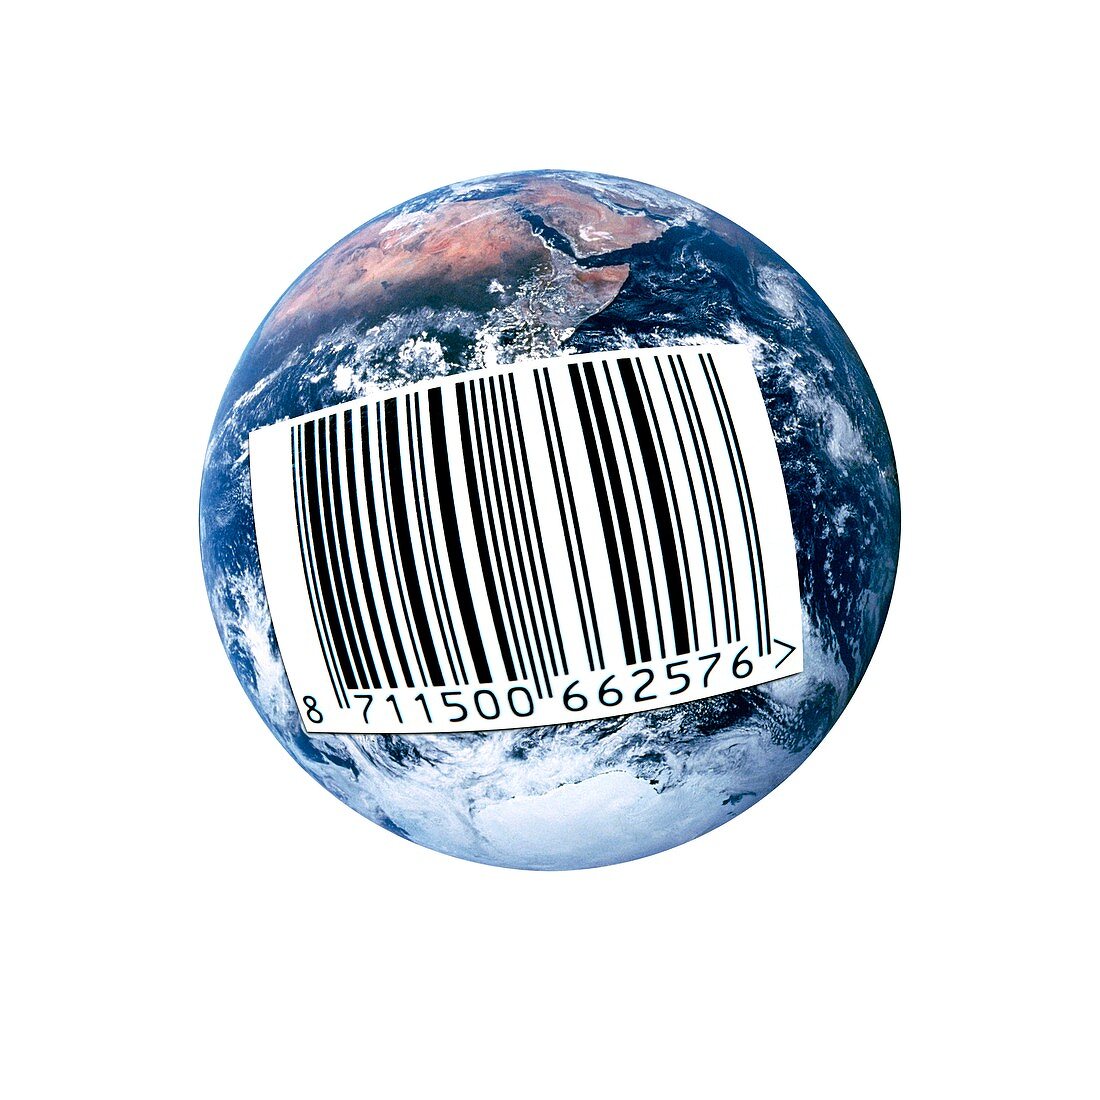 Barcoded Earth,conceptual image